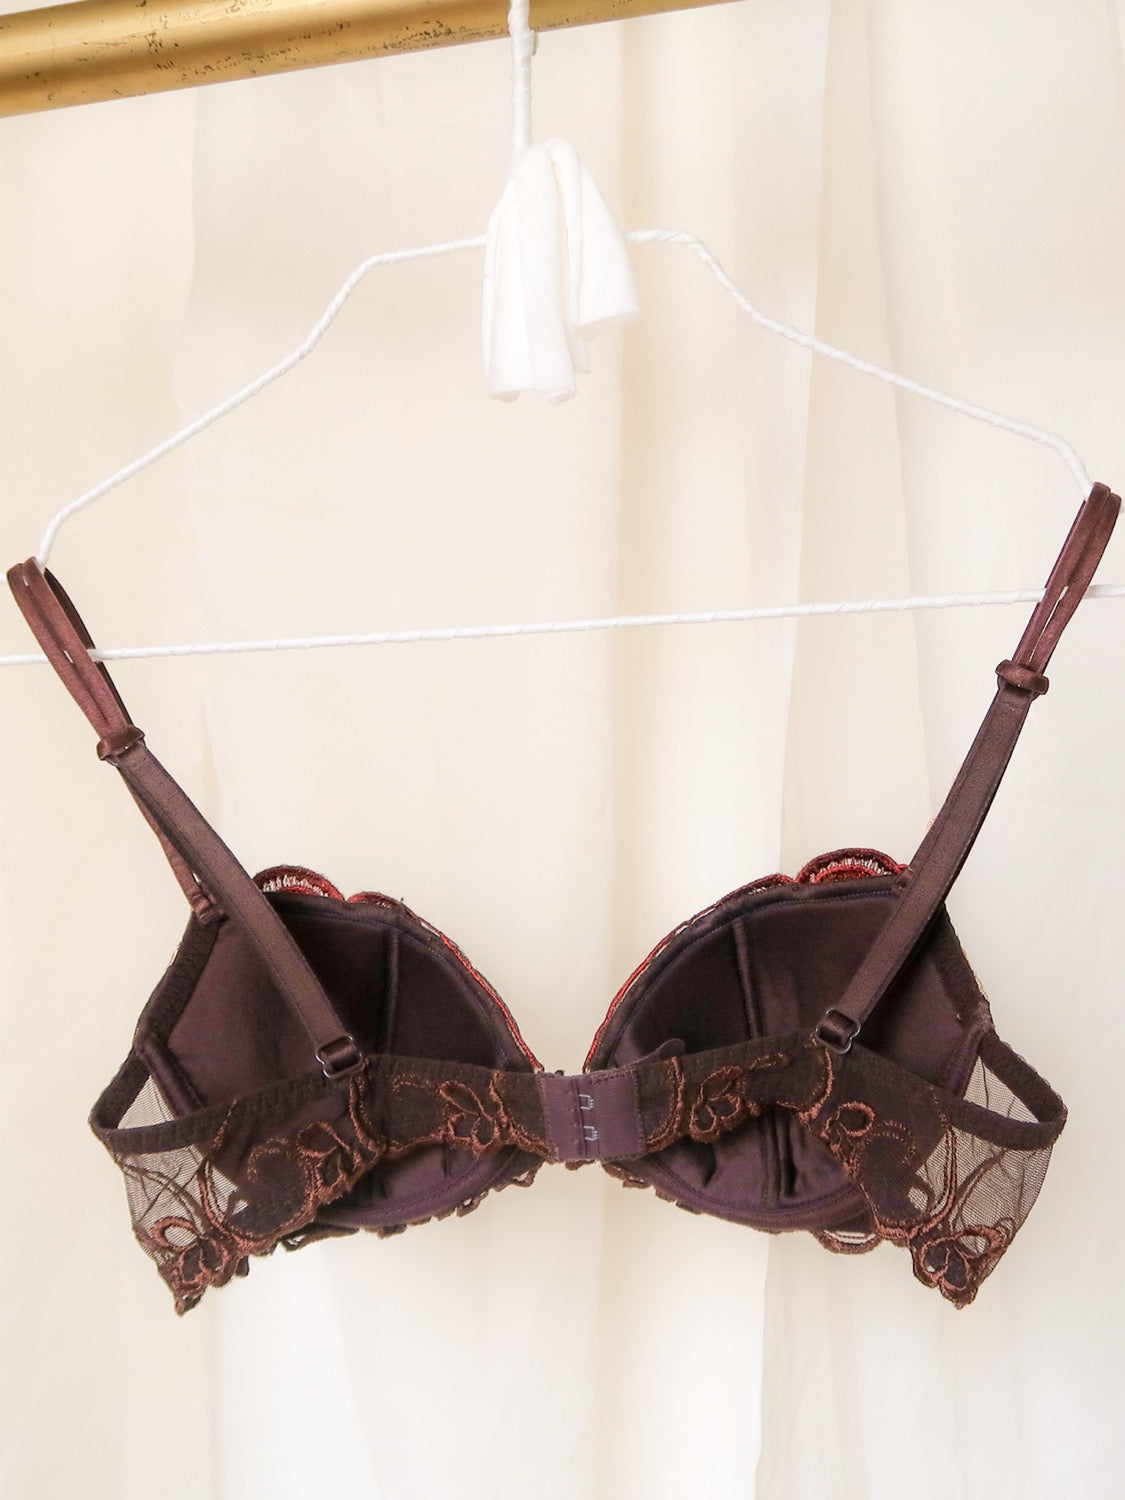 EUROPEAN + MUSE EMBROIDERED BROWN PADDED BRA - (30B/32A/28C)